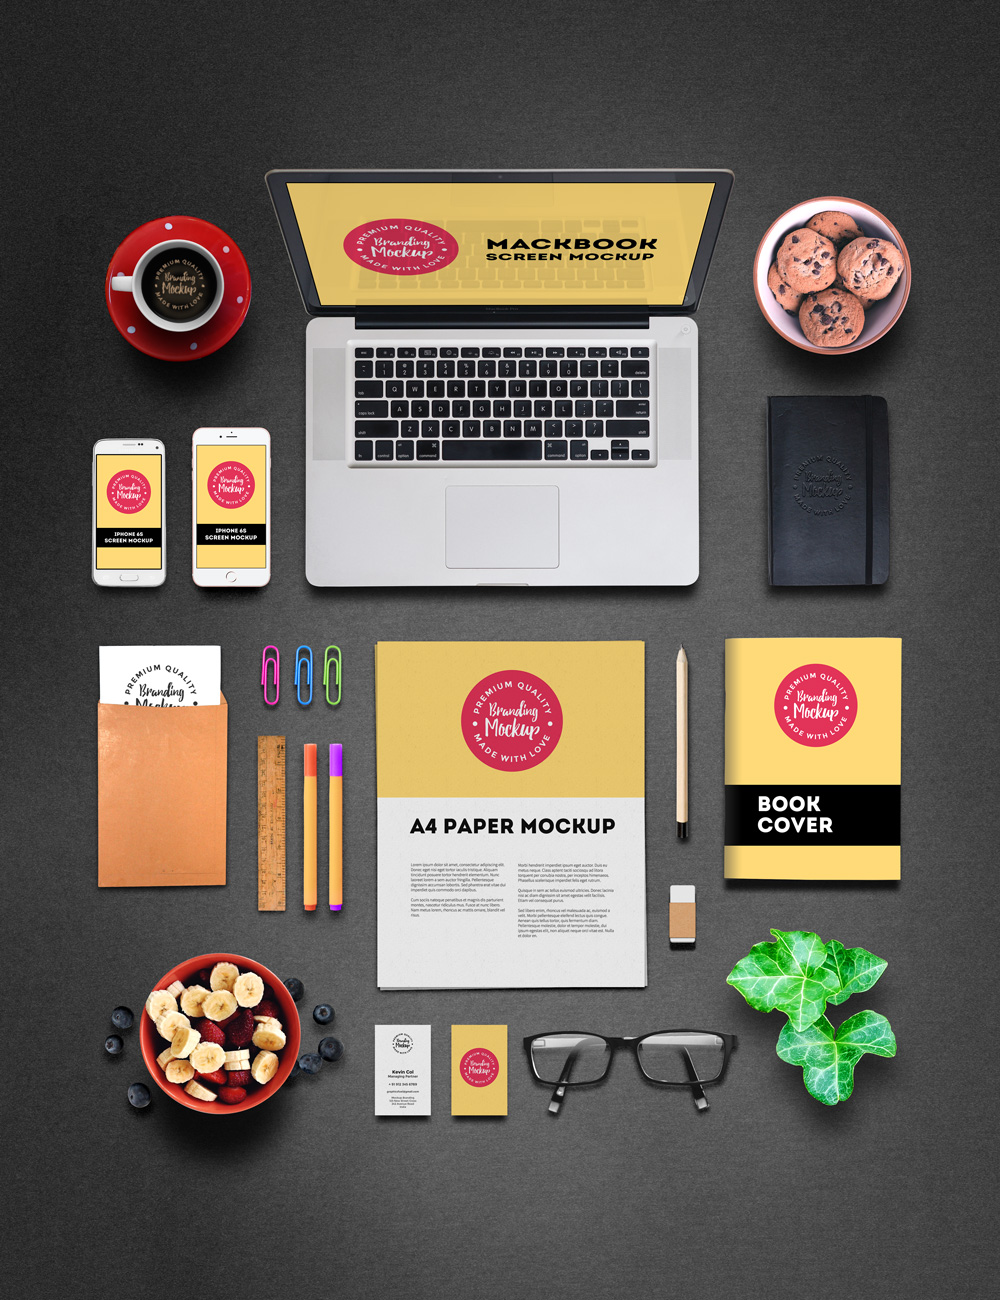 Download Branding and Identity Mockup - GraphicsFuel Free Mockups